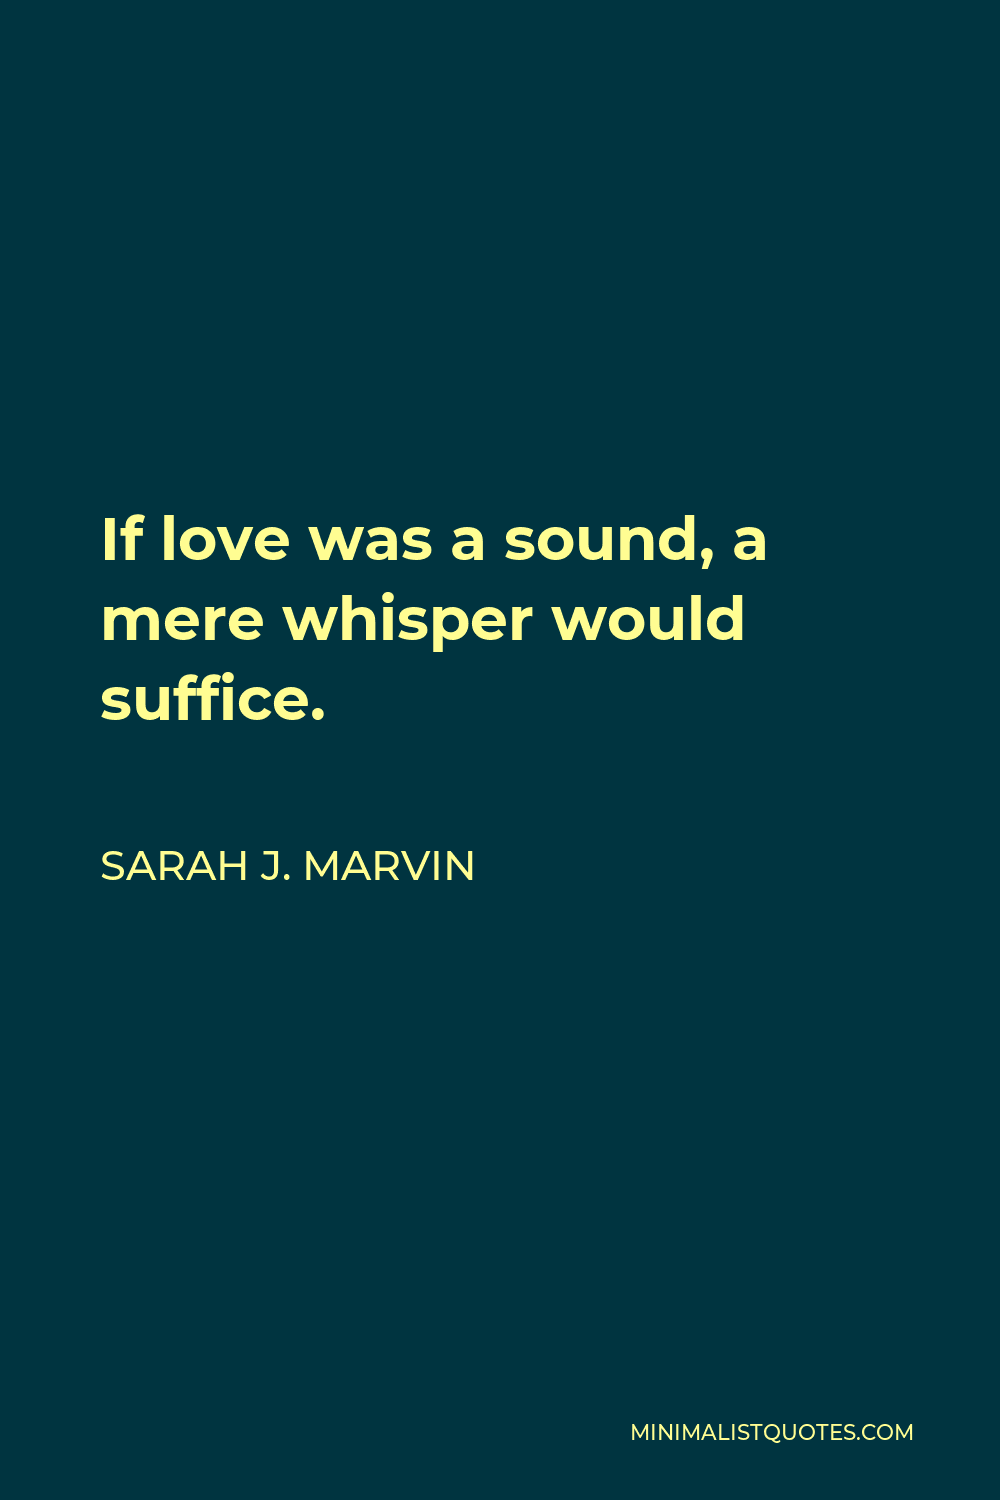 Sarah J. Marvin Quote - If love was a sound, a mere whisper would suffice.